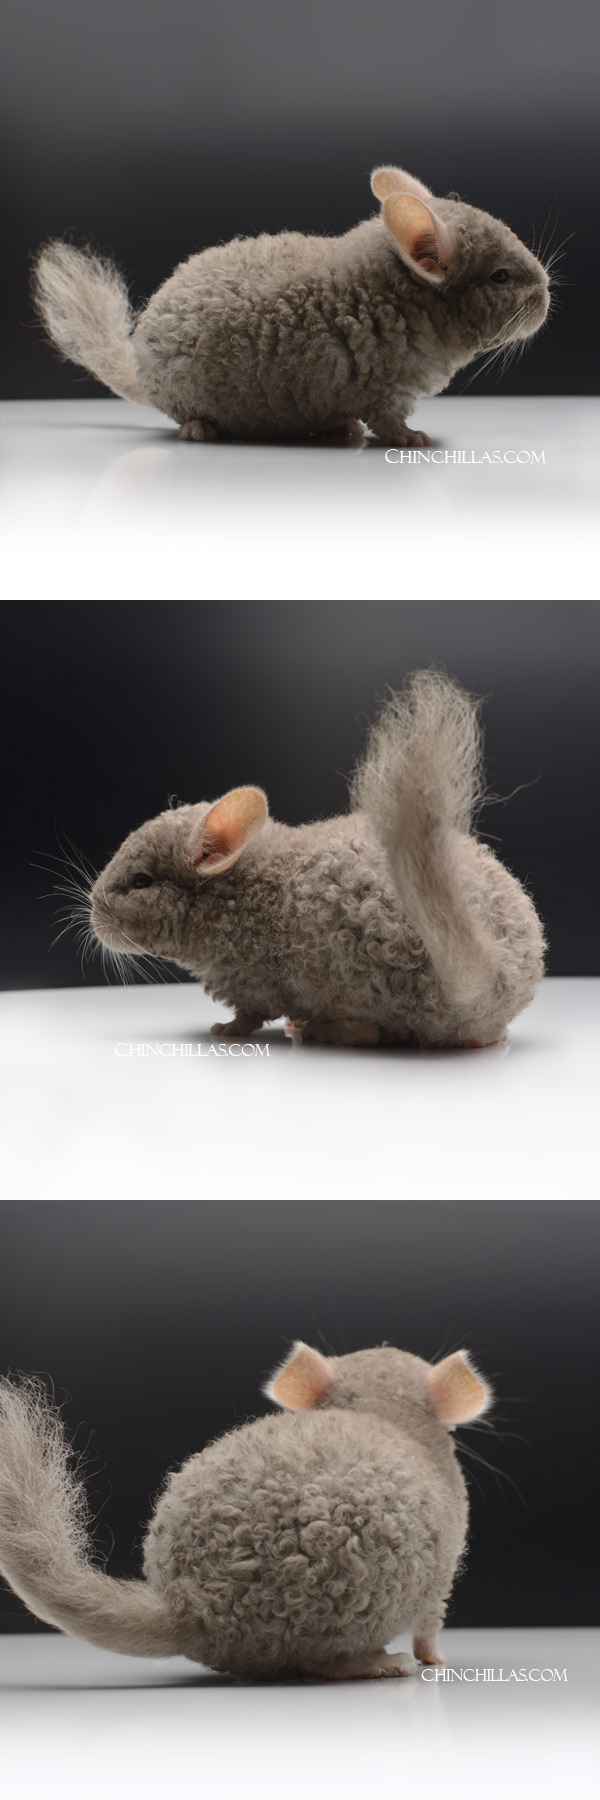 Chinchilla or related item offered for sale or export on Chinchillas.com - 24040 Exceptional Tan Full Locken Male Chinchilla